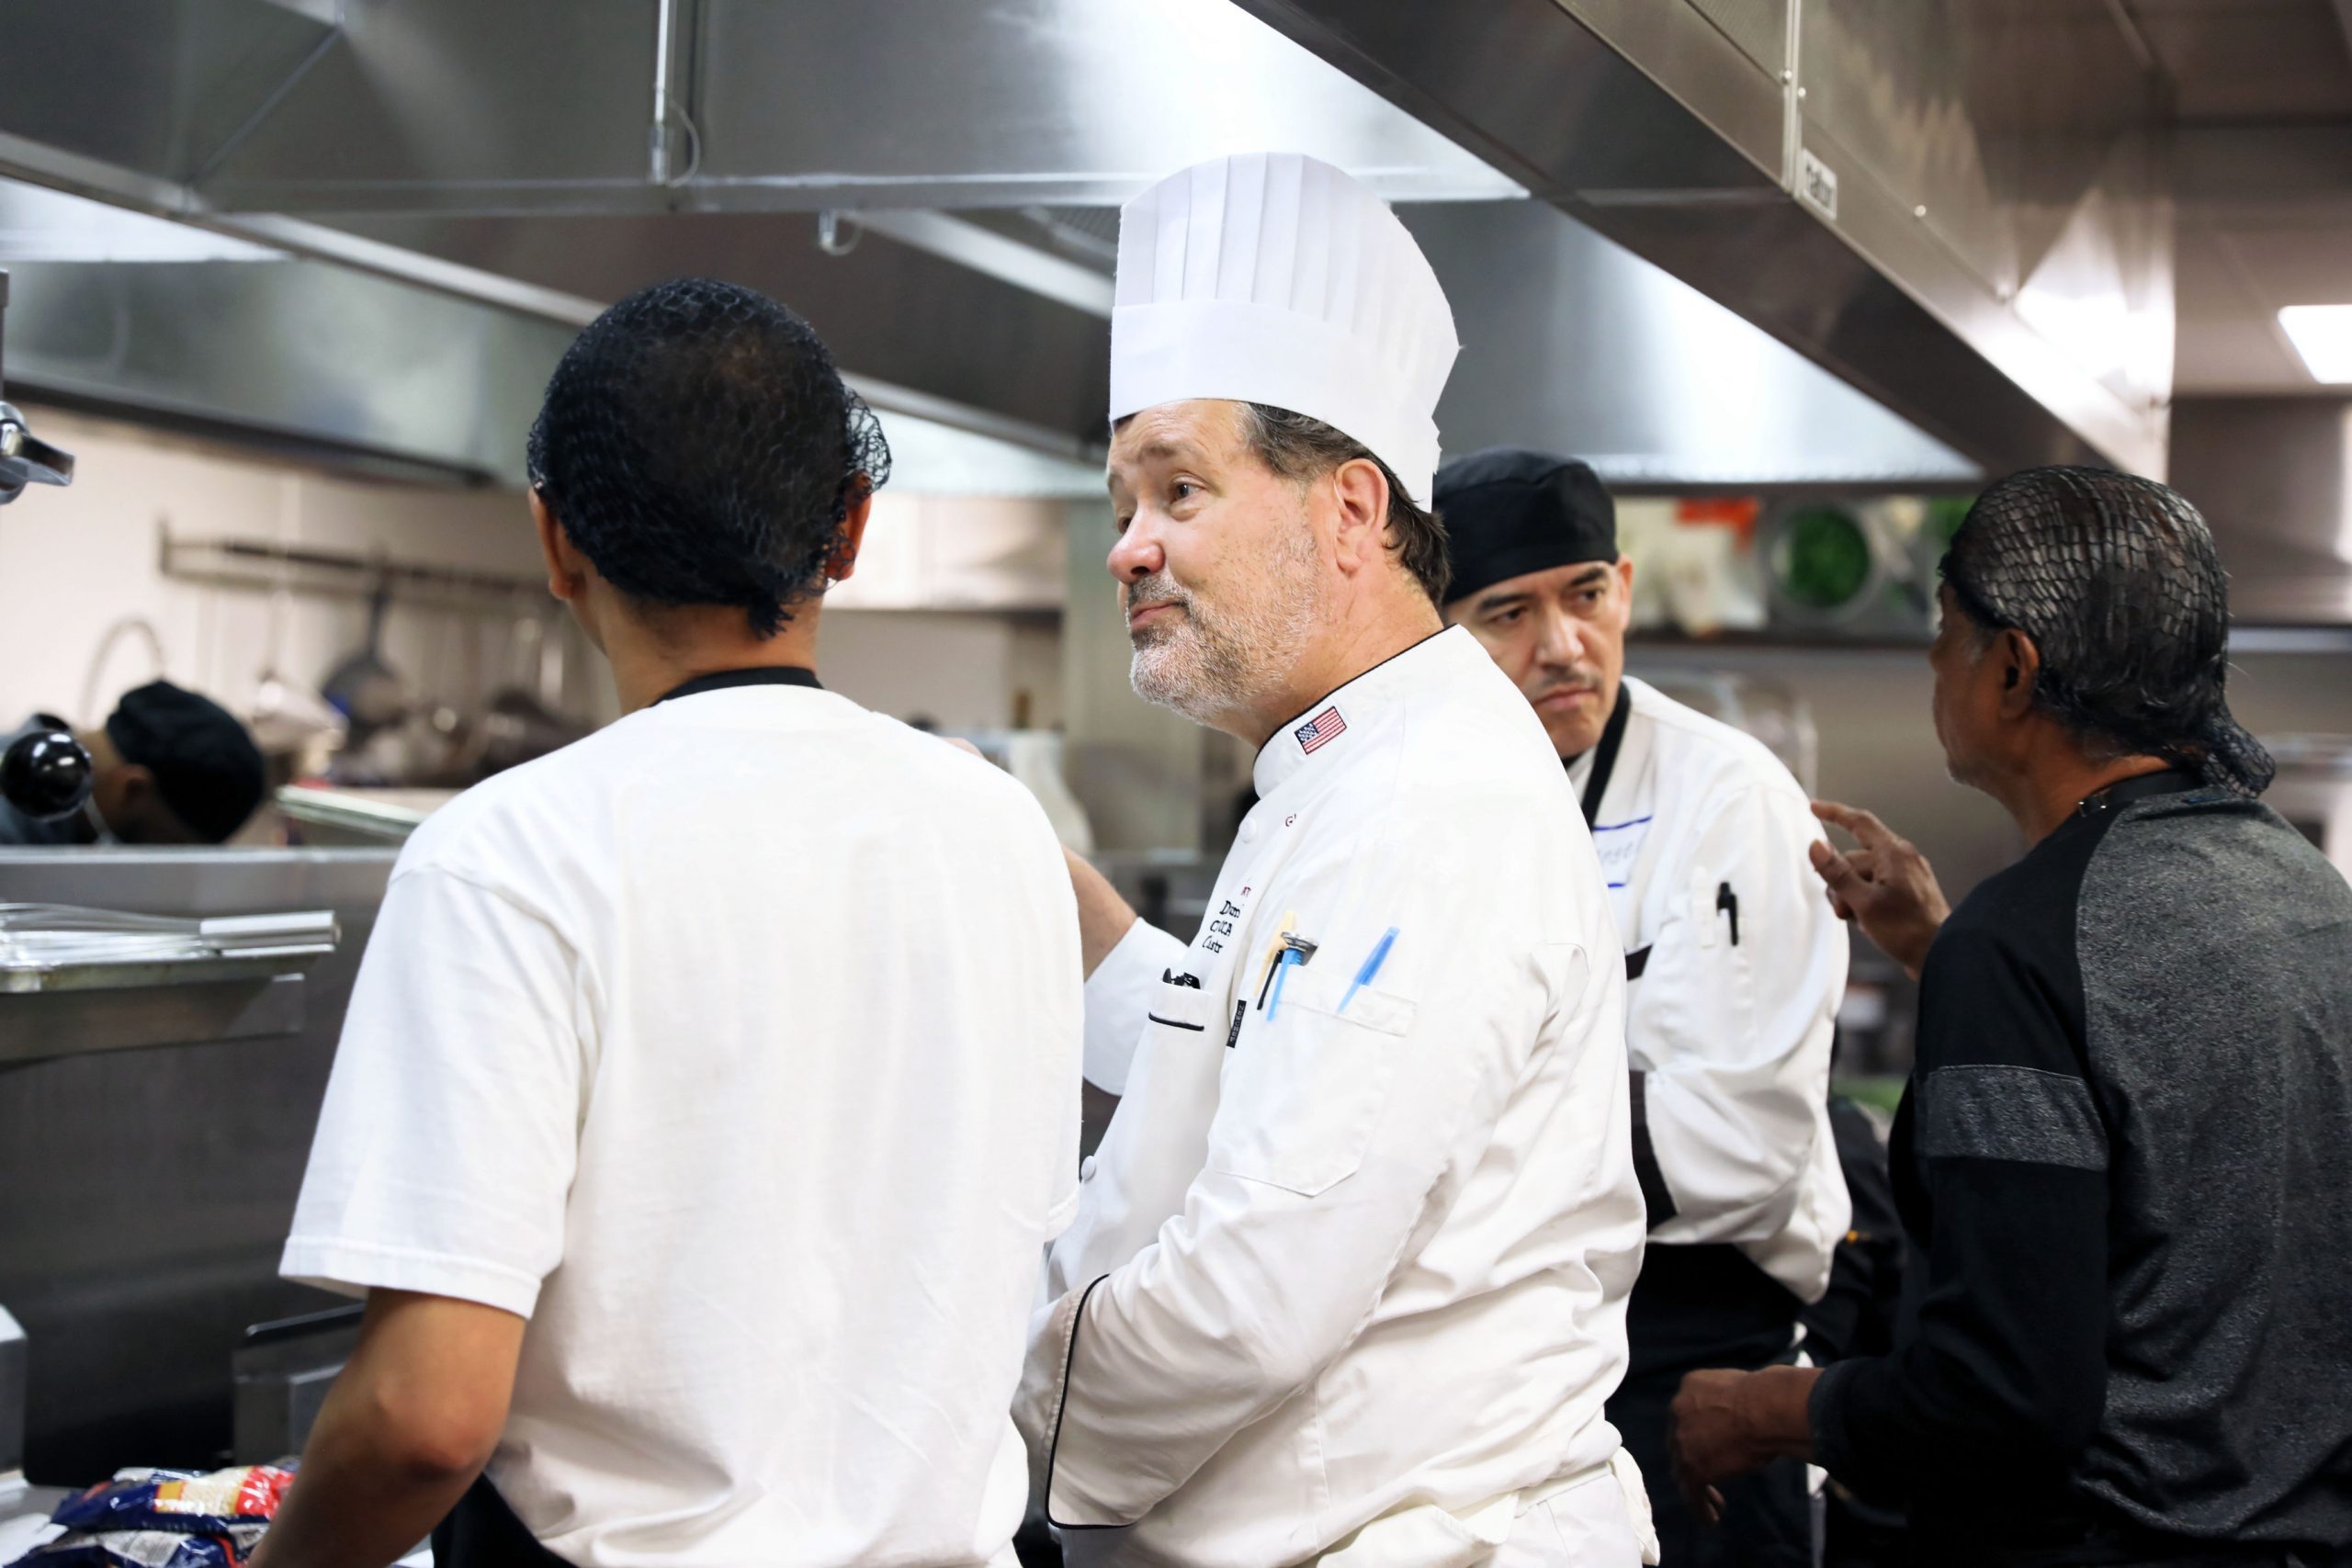 chef speaking to employees